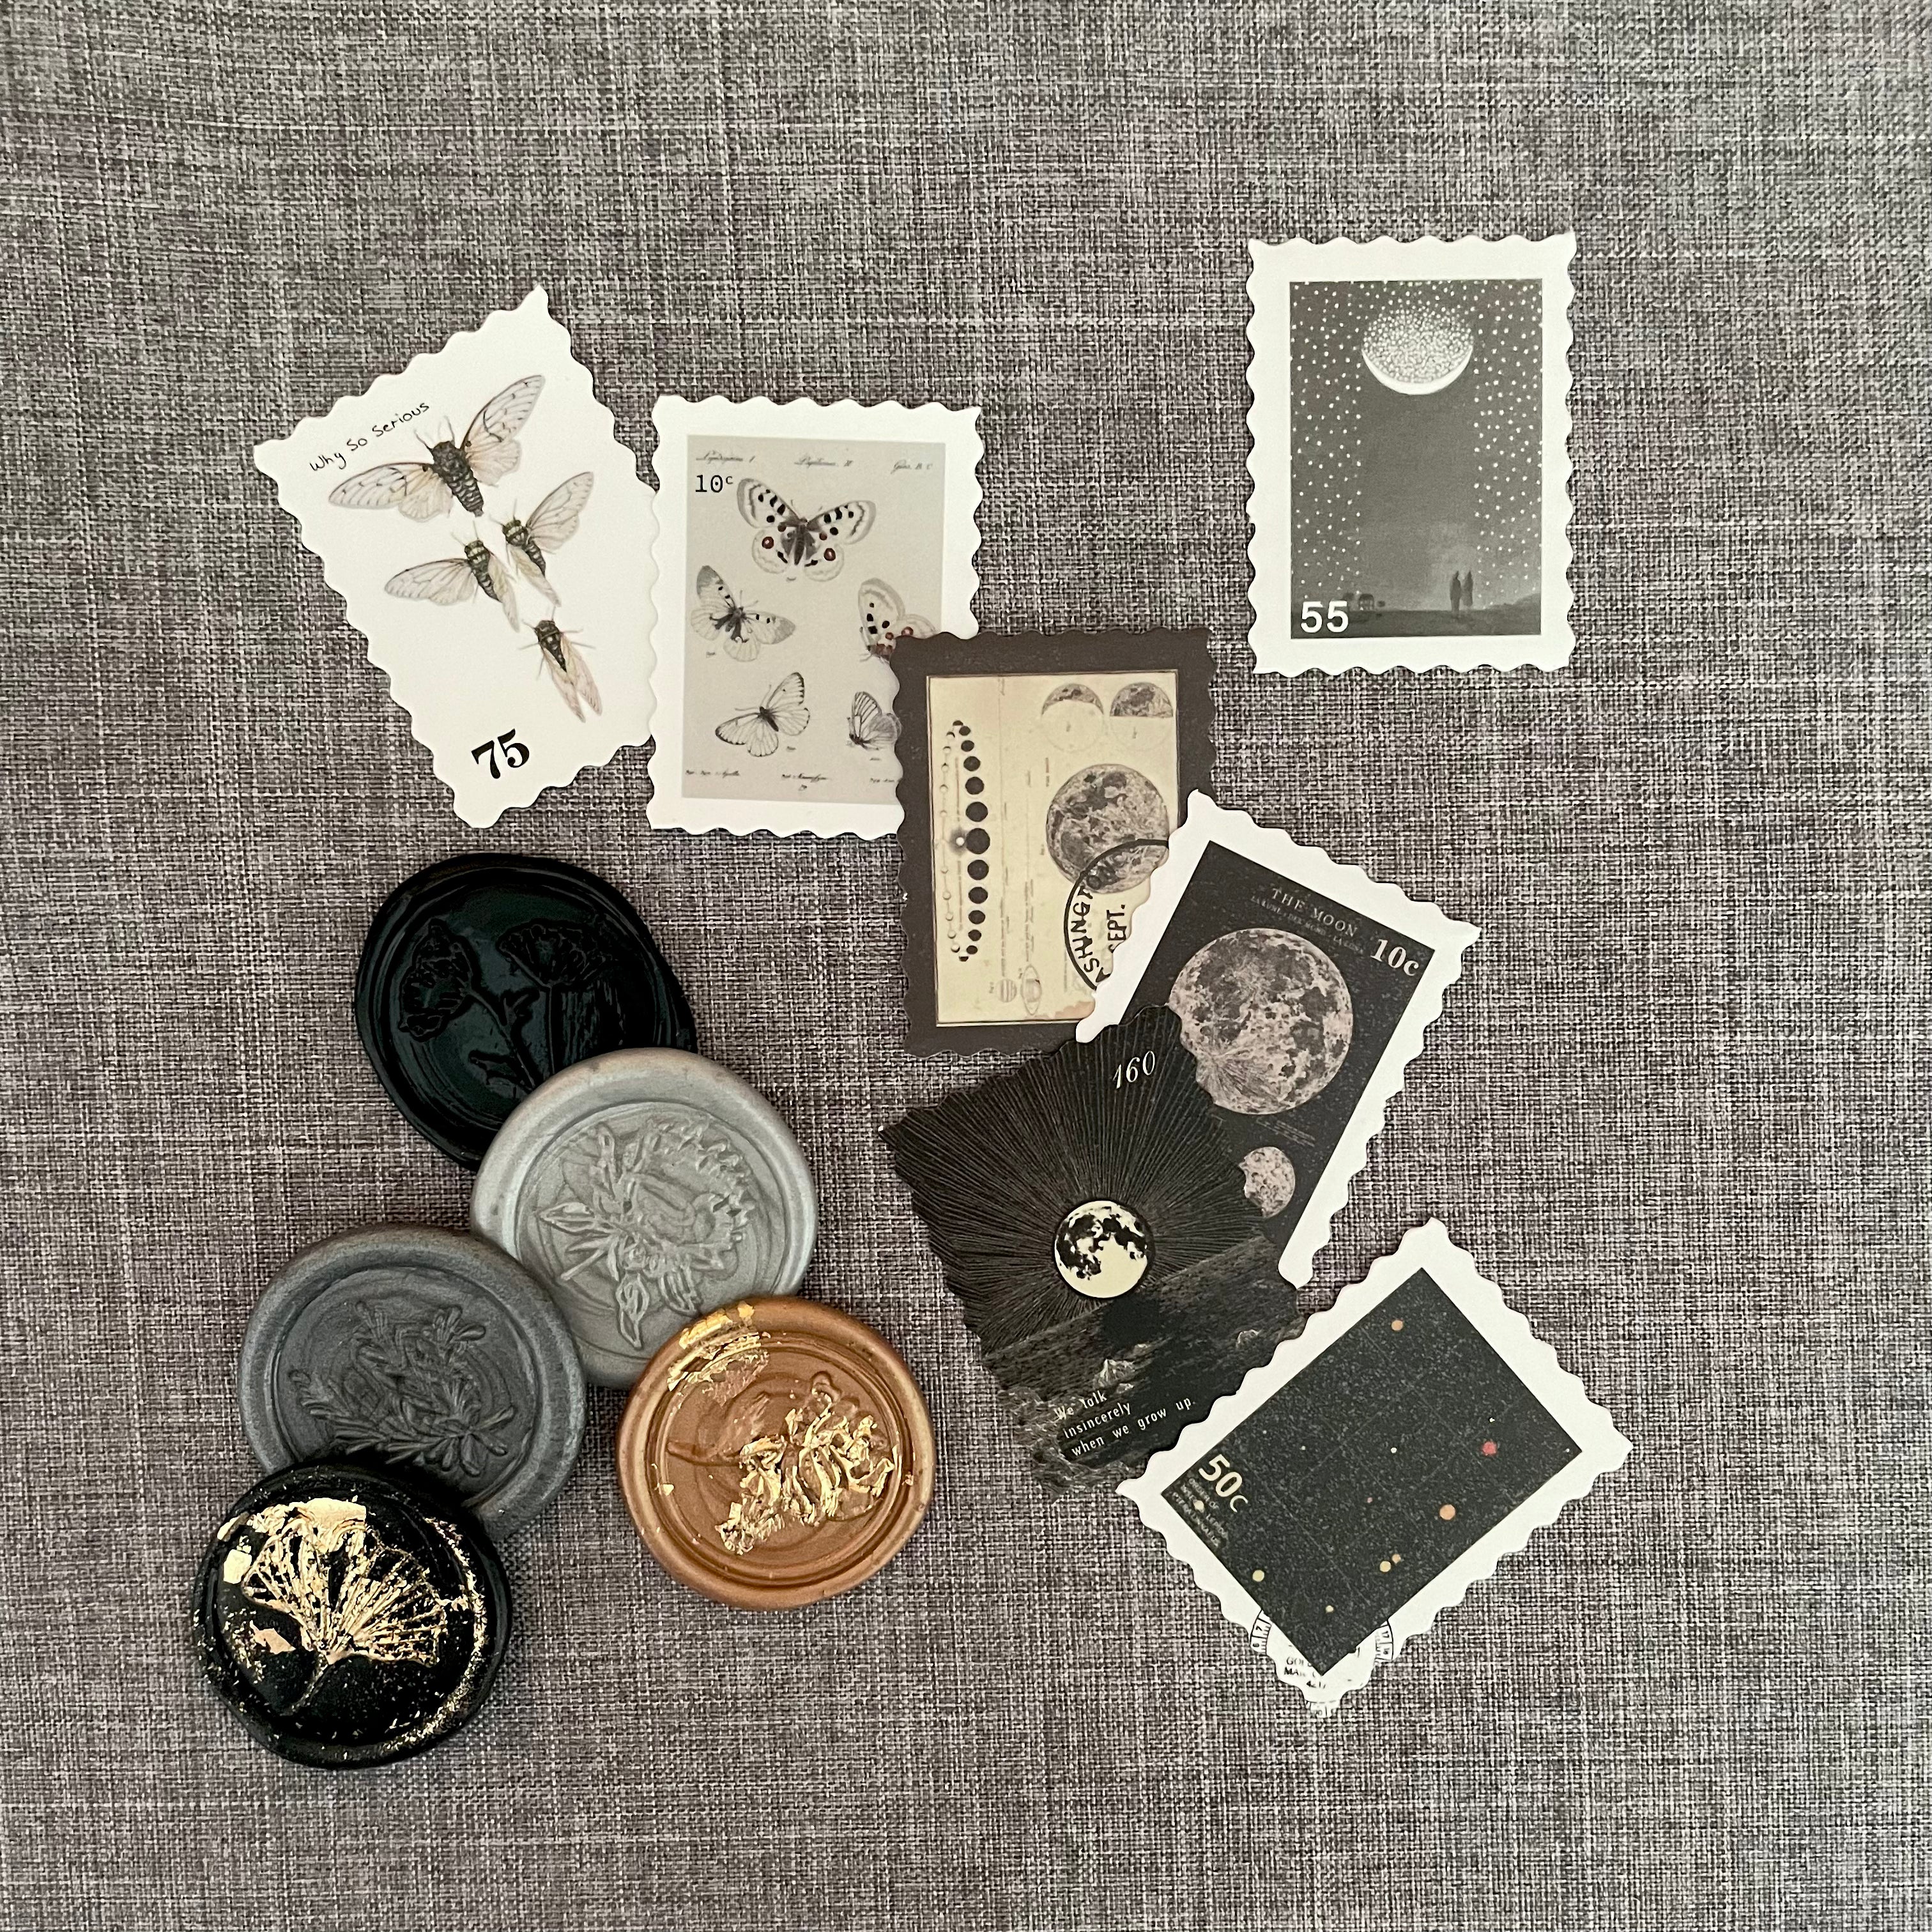 Black & Gold Mini Flat Lay Prop Kit including 5 wax seals and 7 faux postage stamps in shades of Black & Gray - Wedding Flat lay props from Champagne & GRIT